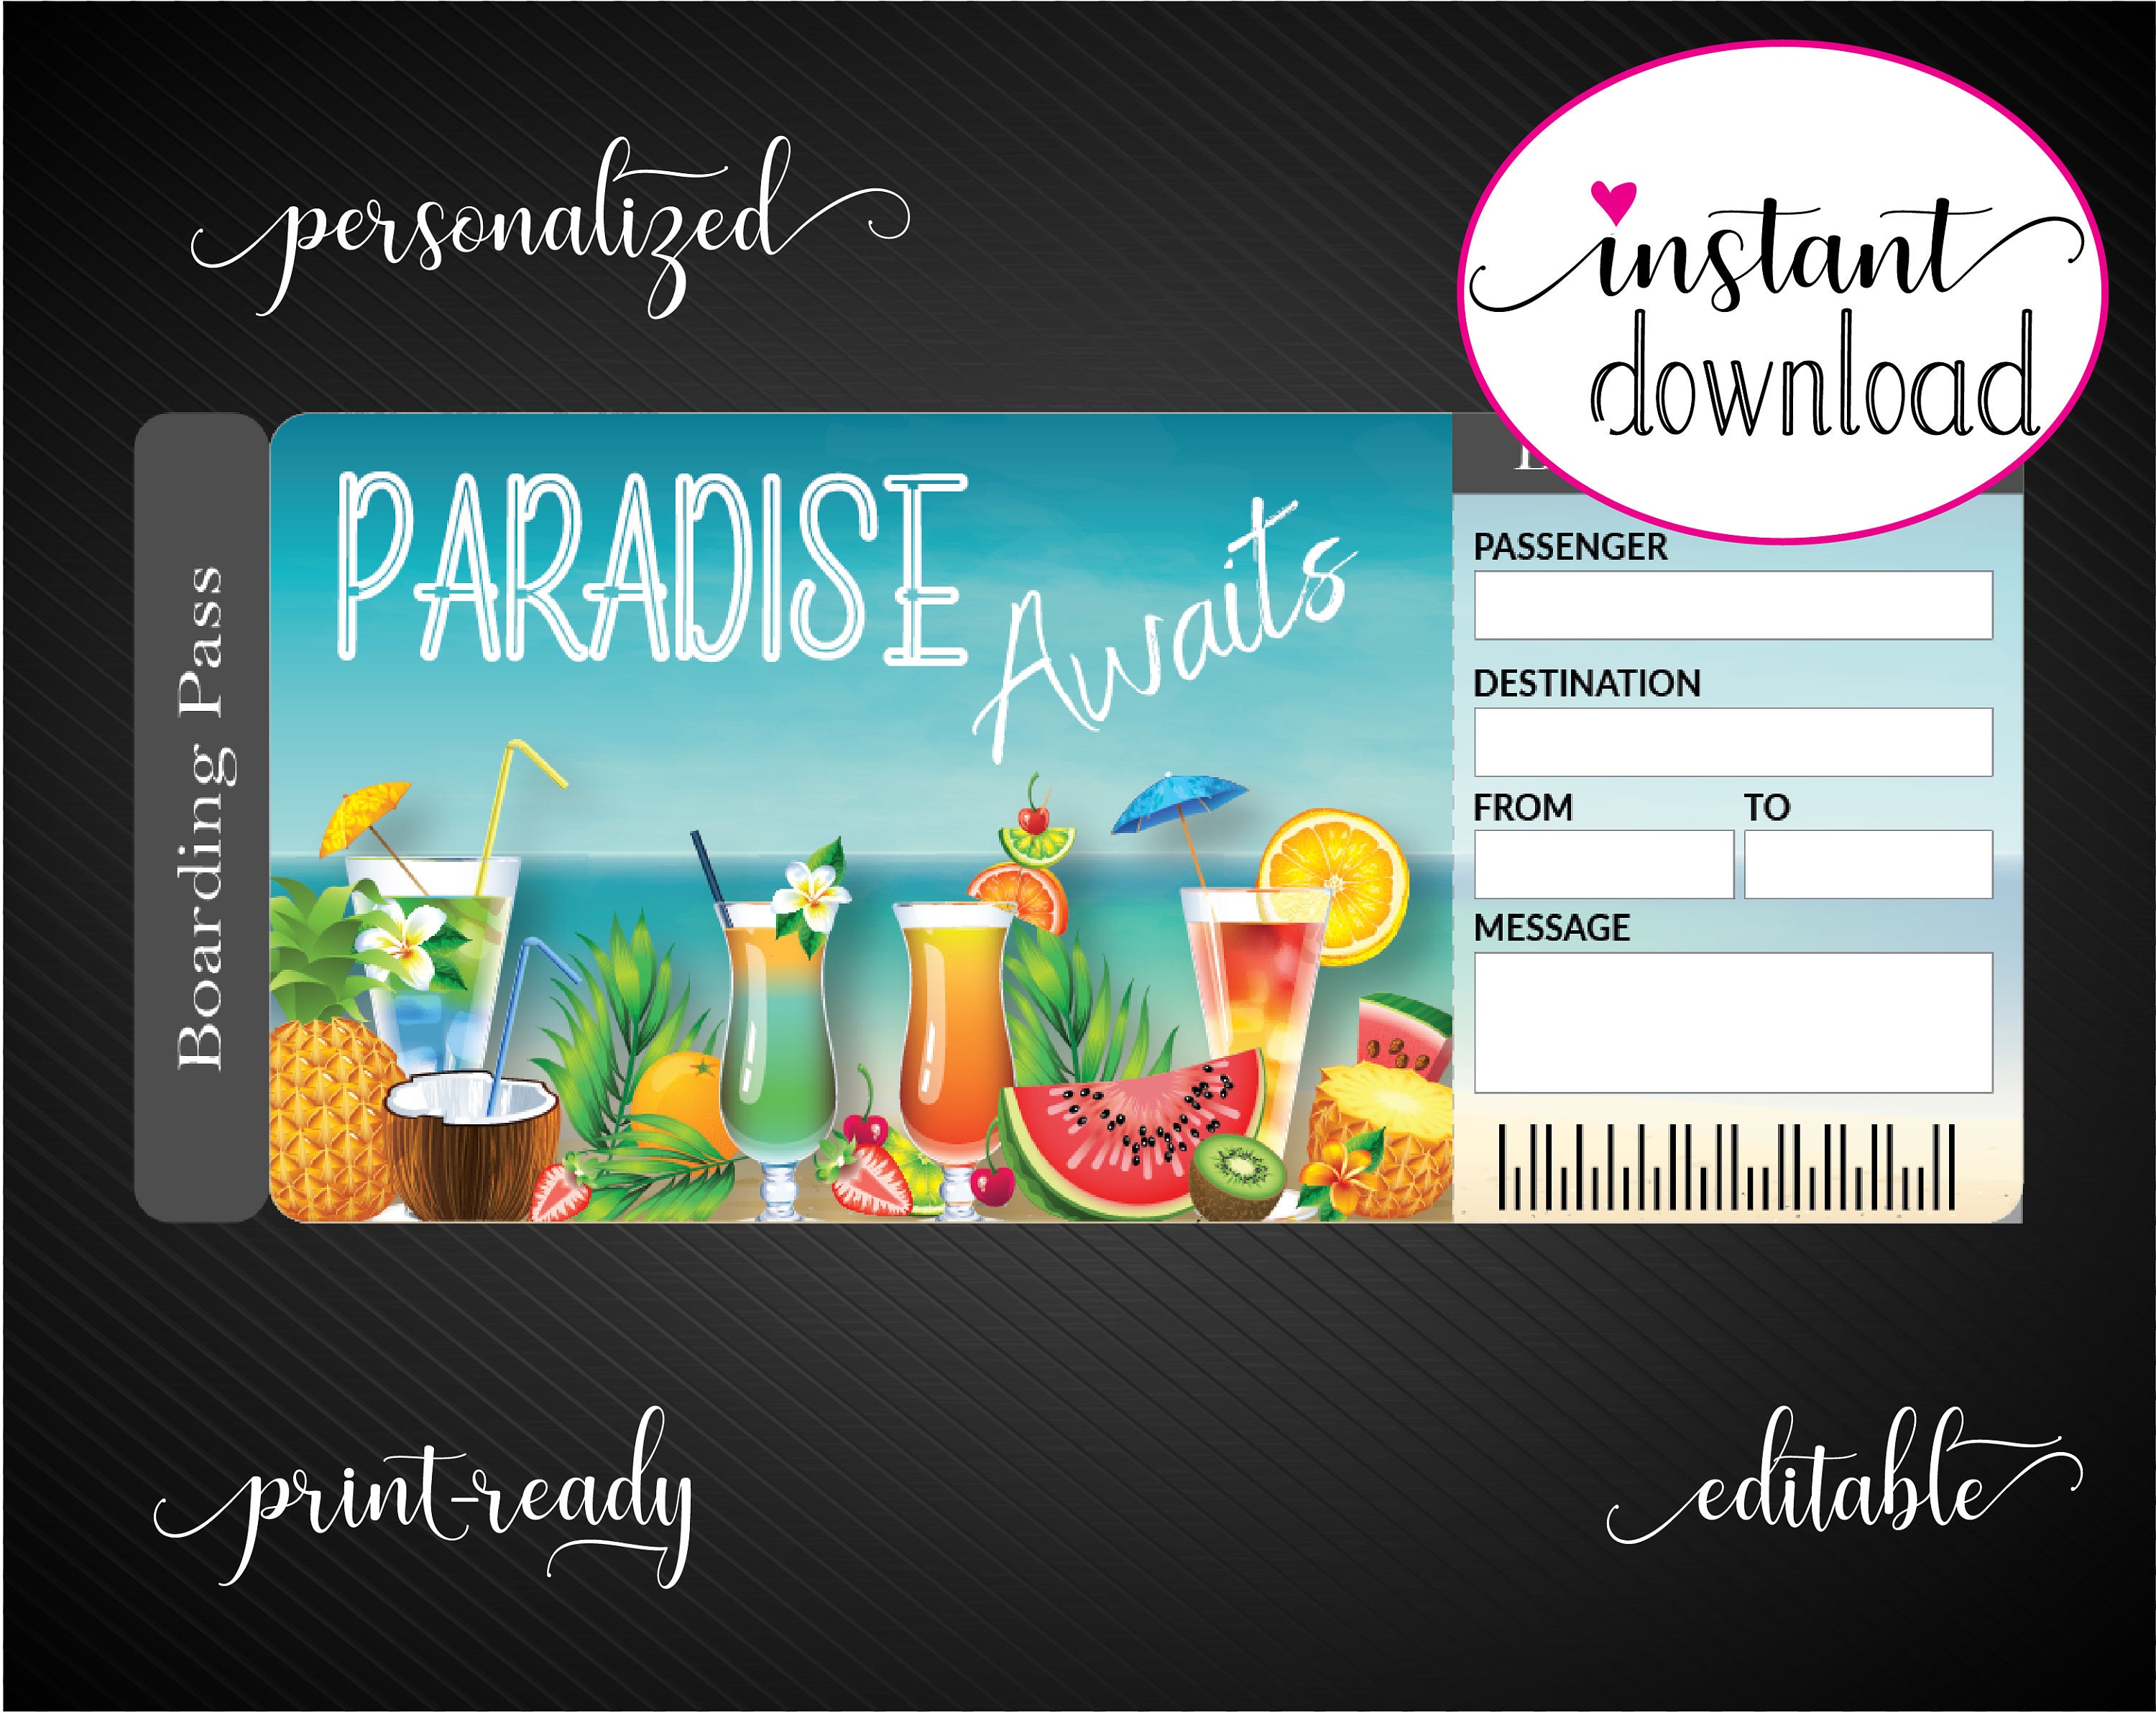 2 Tickets to Paradise, I created this identity and illustra…